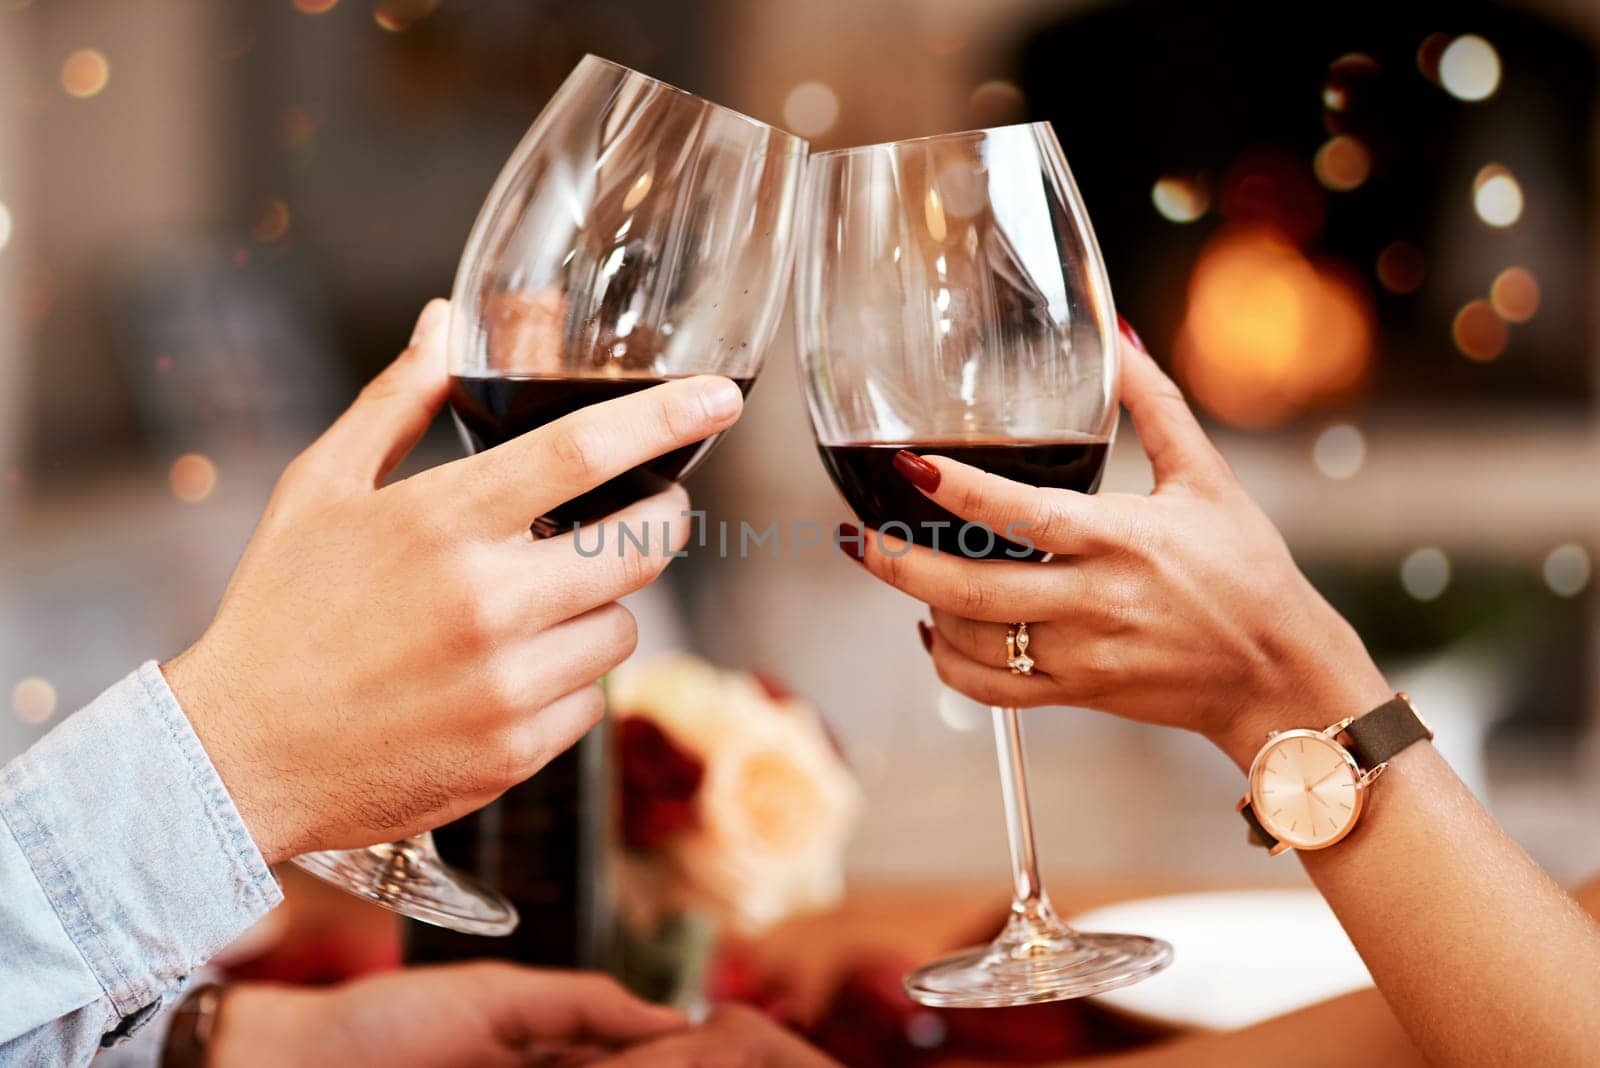 Red wine, glass and couple hands toast, celebrate or cheers in 5 star restaurant or fine dining alcohol store. Romance love, marriage anniversary or people on Valentines Day date for holiday event.